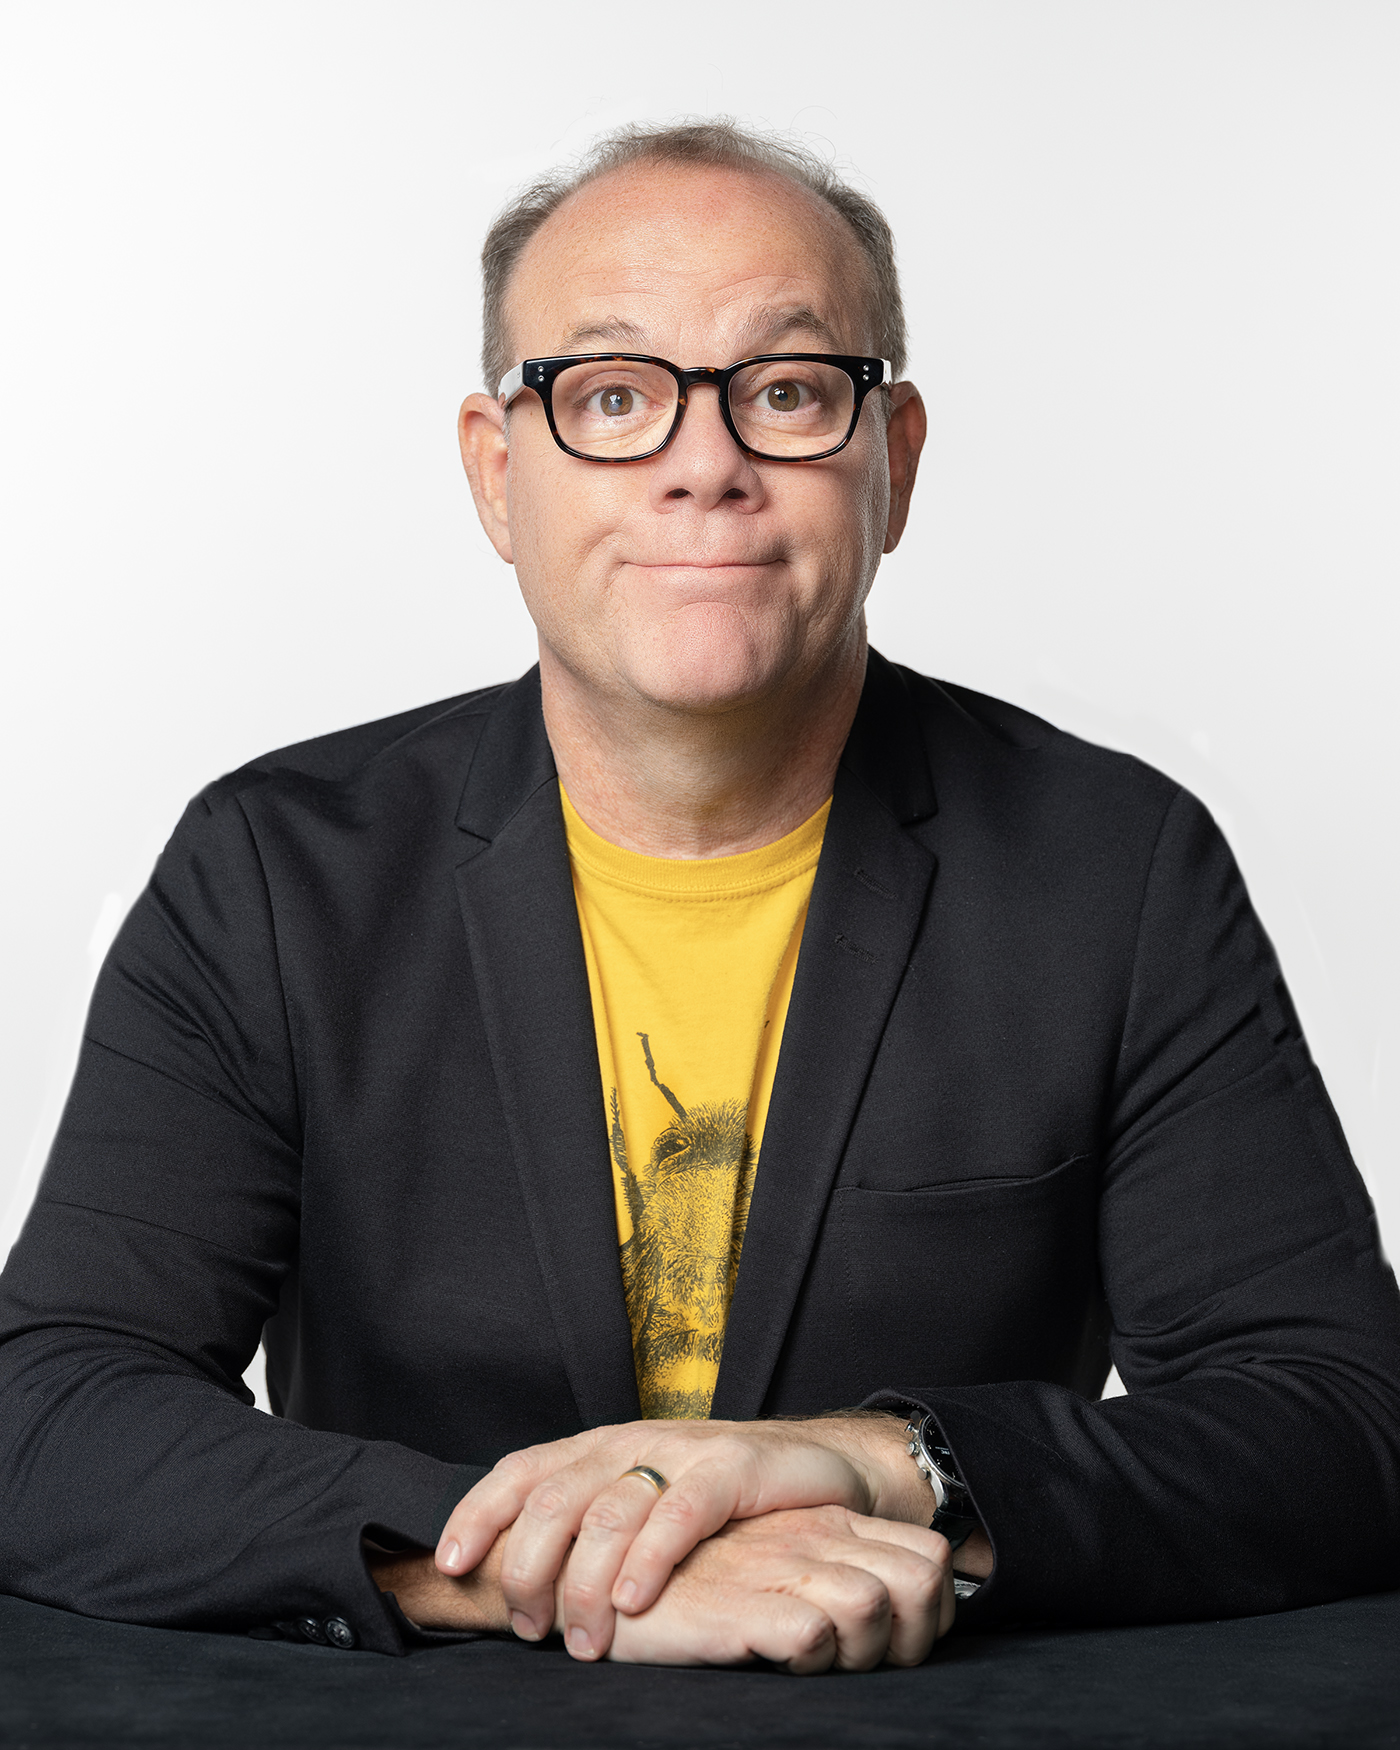 Comedian Tom Papa announces his 2023 Comedy Tour Will be at Kohler Memorial Theater on Saturday, February 4